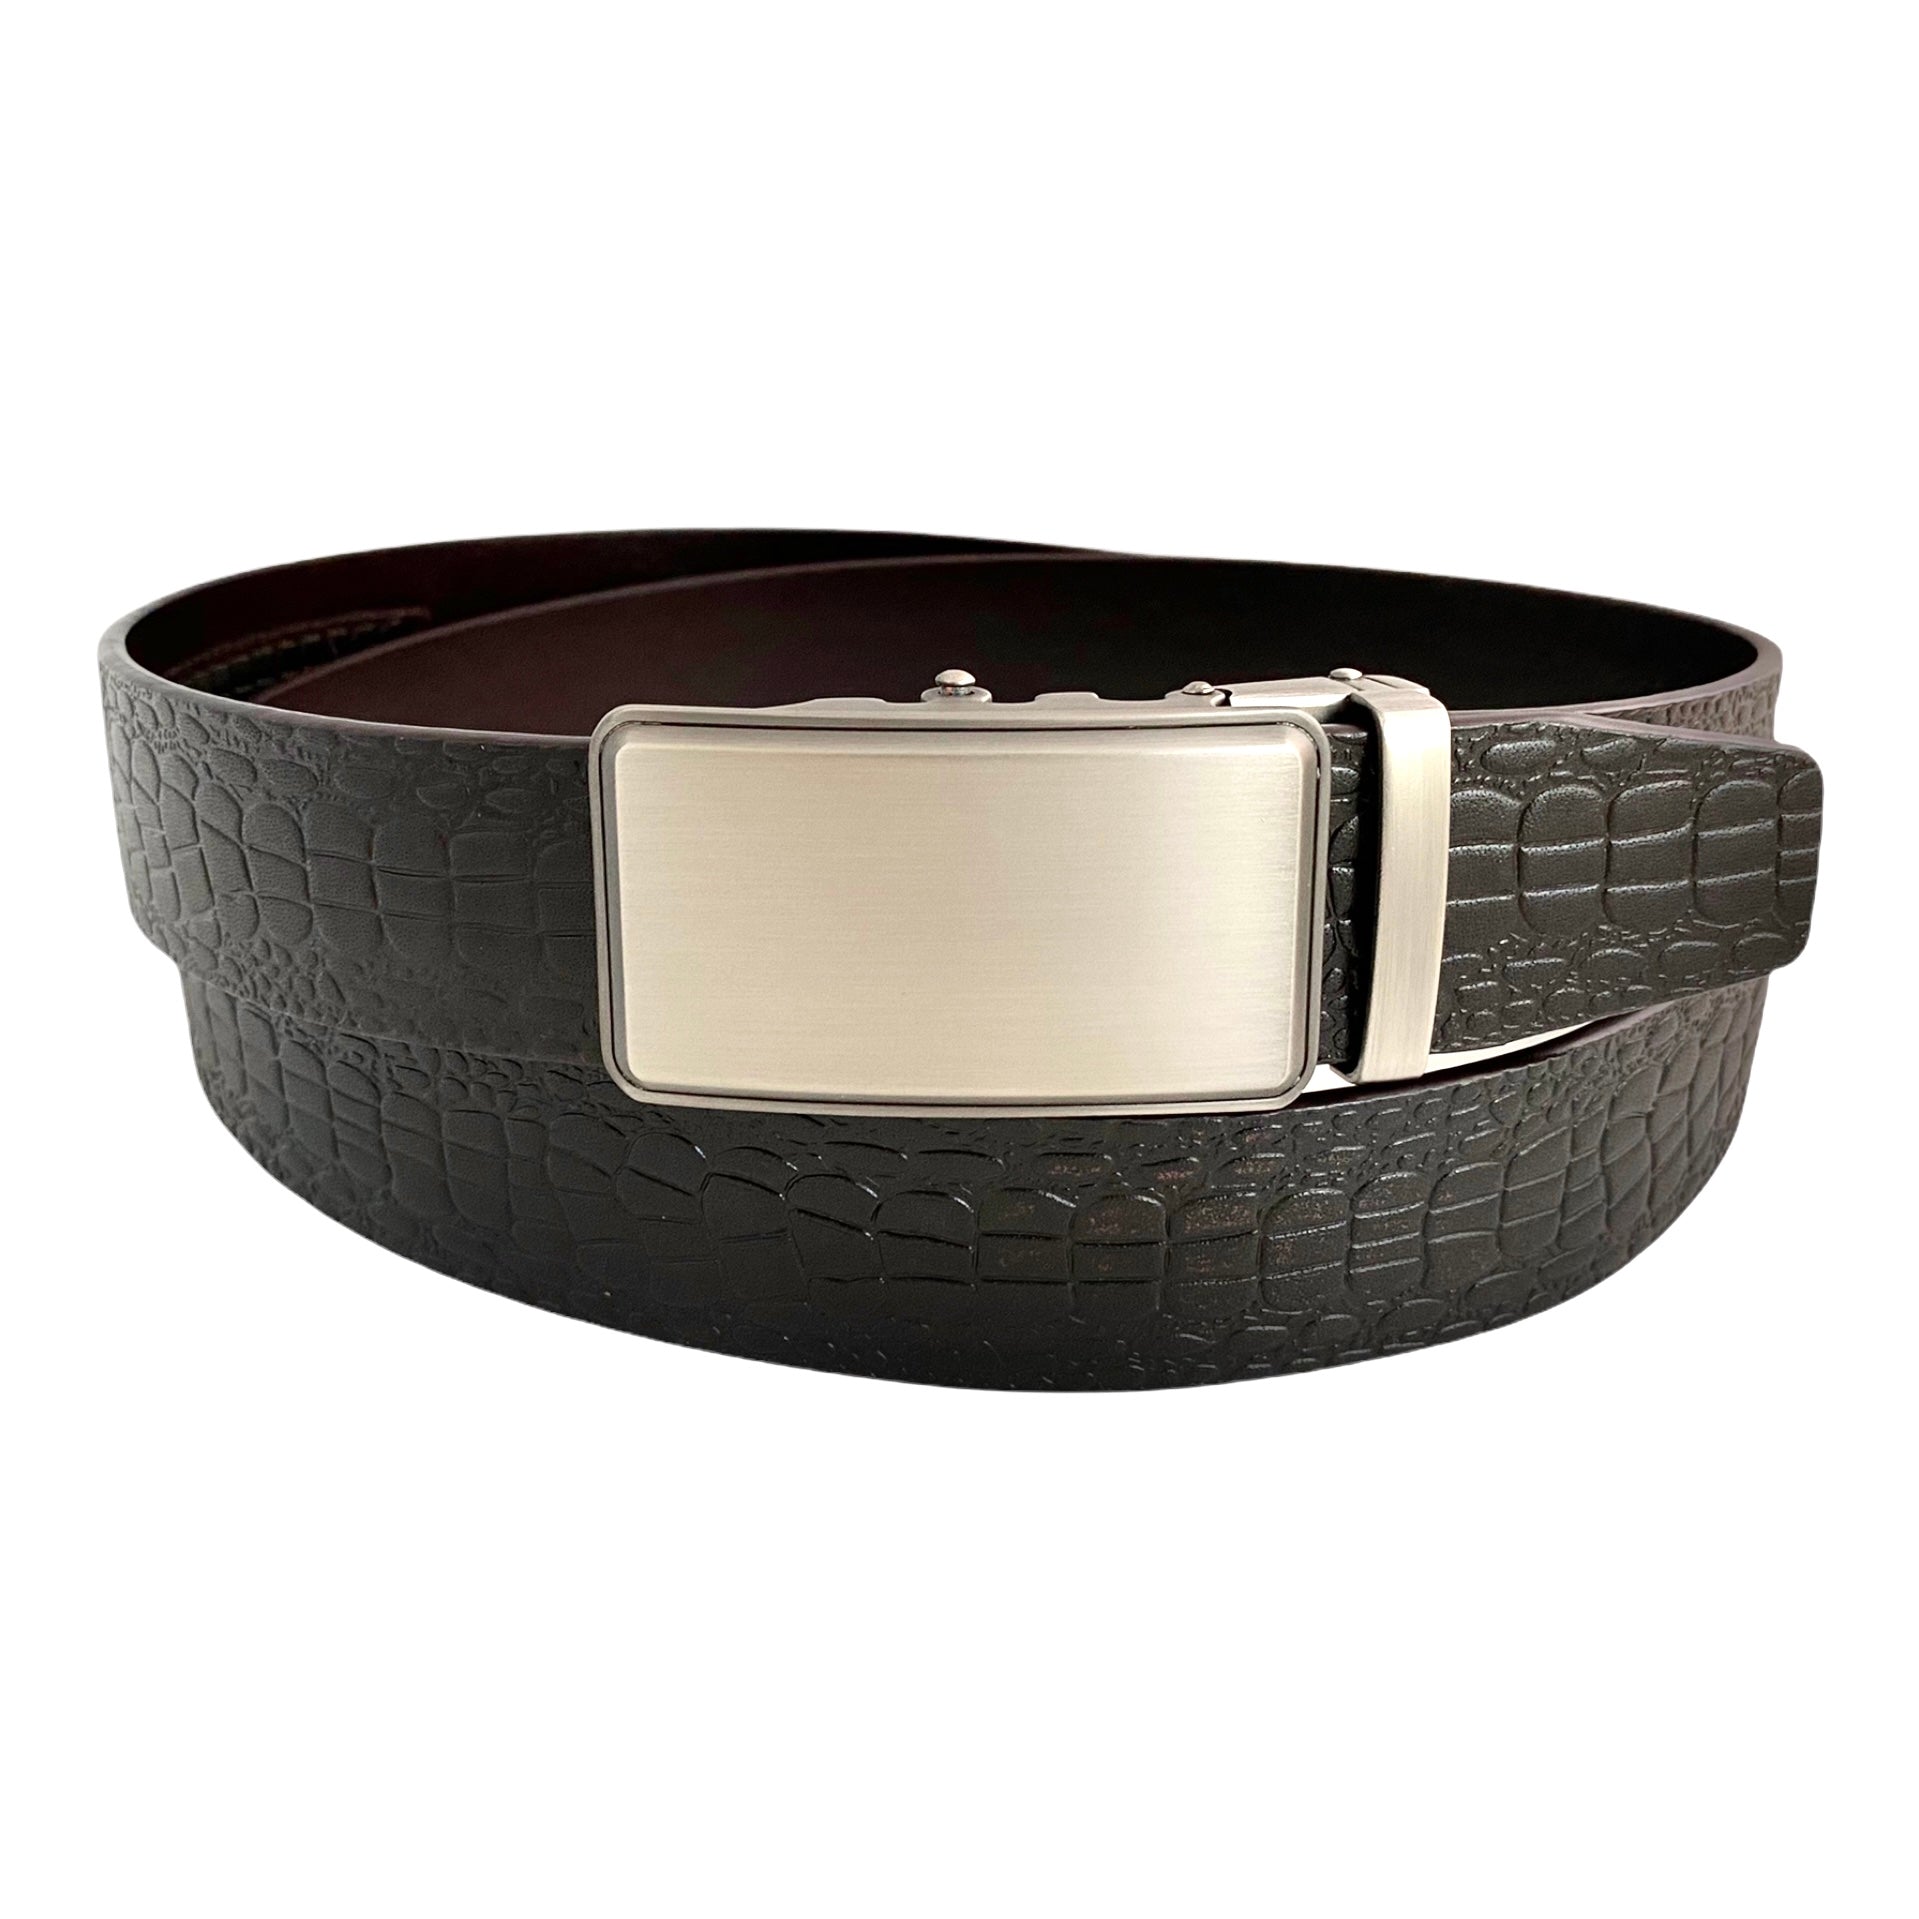 1.38" Genuine Leather Dark Brown Textured Strap And 1.38" Automatic Buckle Silver